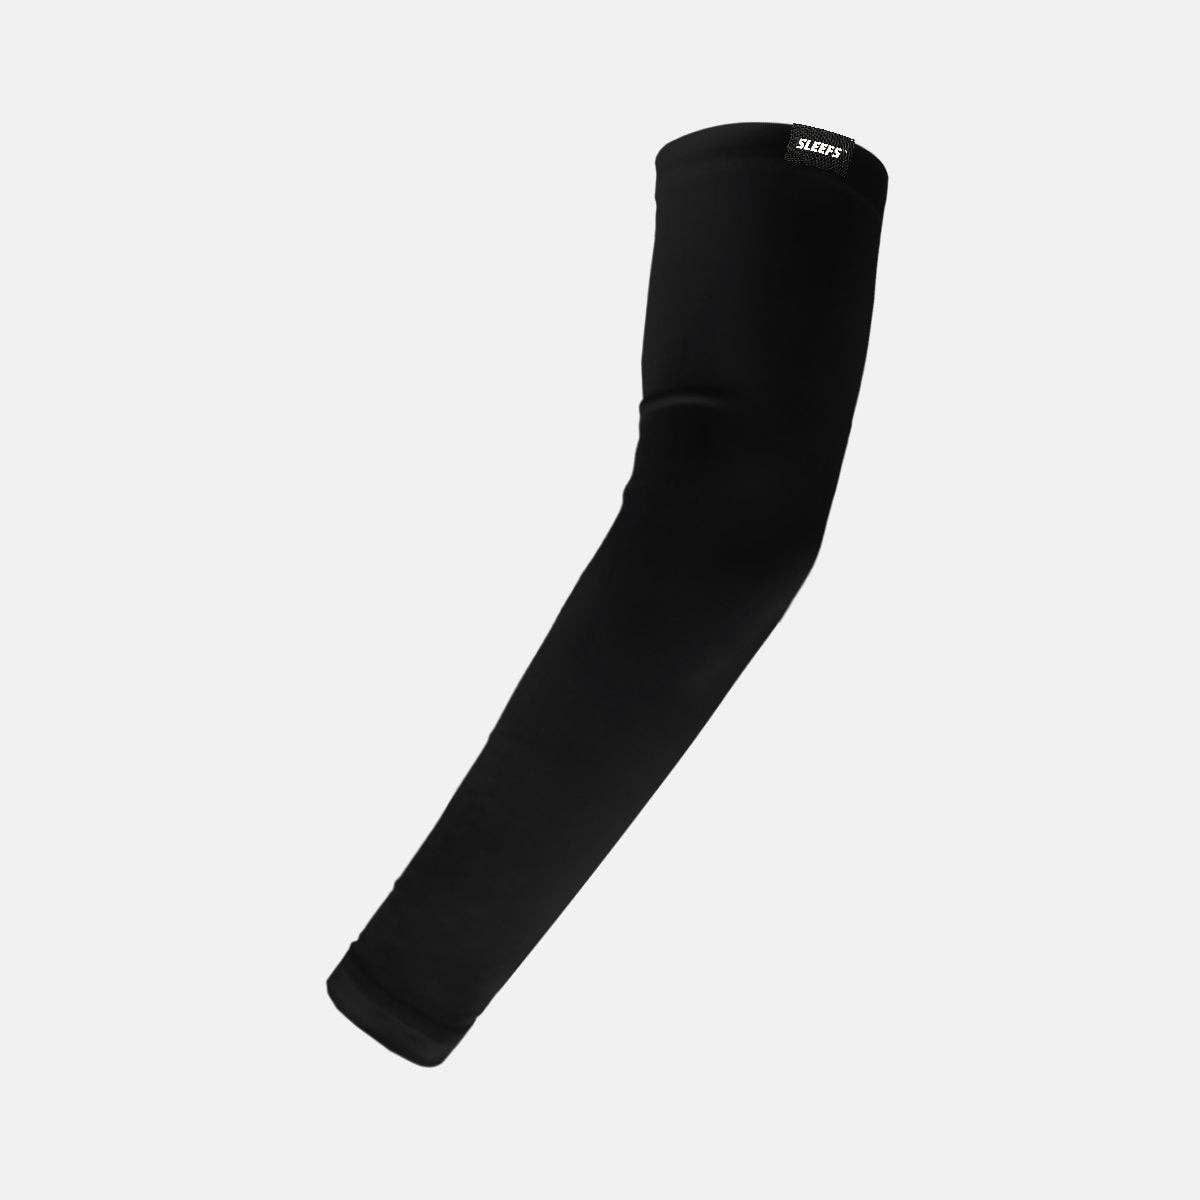 Sleefs Compressions Sleeves